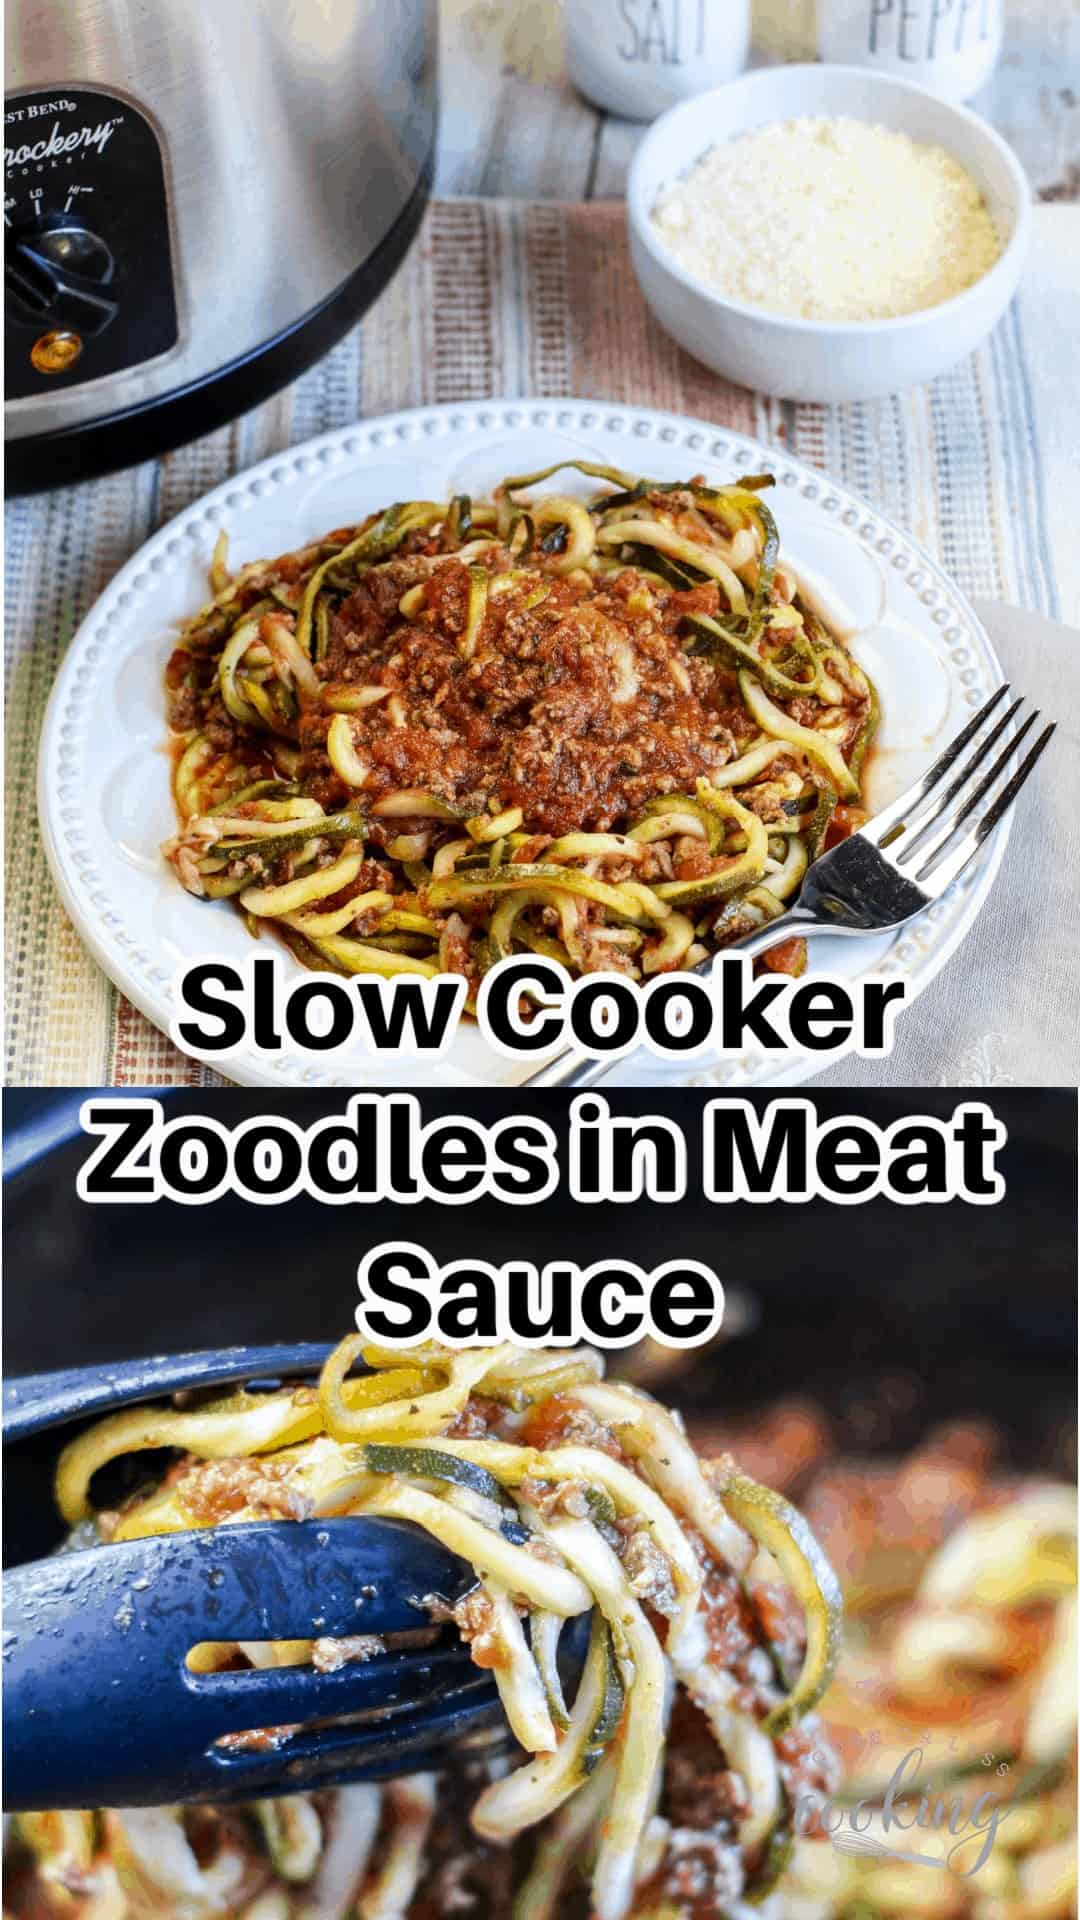 Slow Cooker Zoodles in Meat Sauce is a healthier alternative to a traditional pasta spaghetti meal. It’s a delicious low carb version that substitutes zucchini noodles for pasta with a robust-flavored bolognese sauce. via @Mooreorlesscook